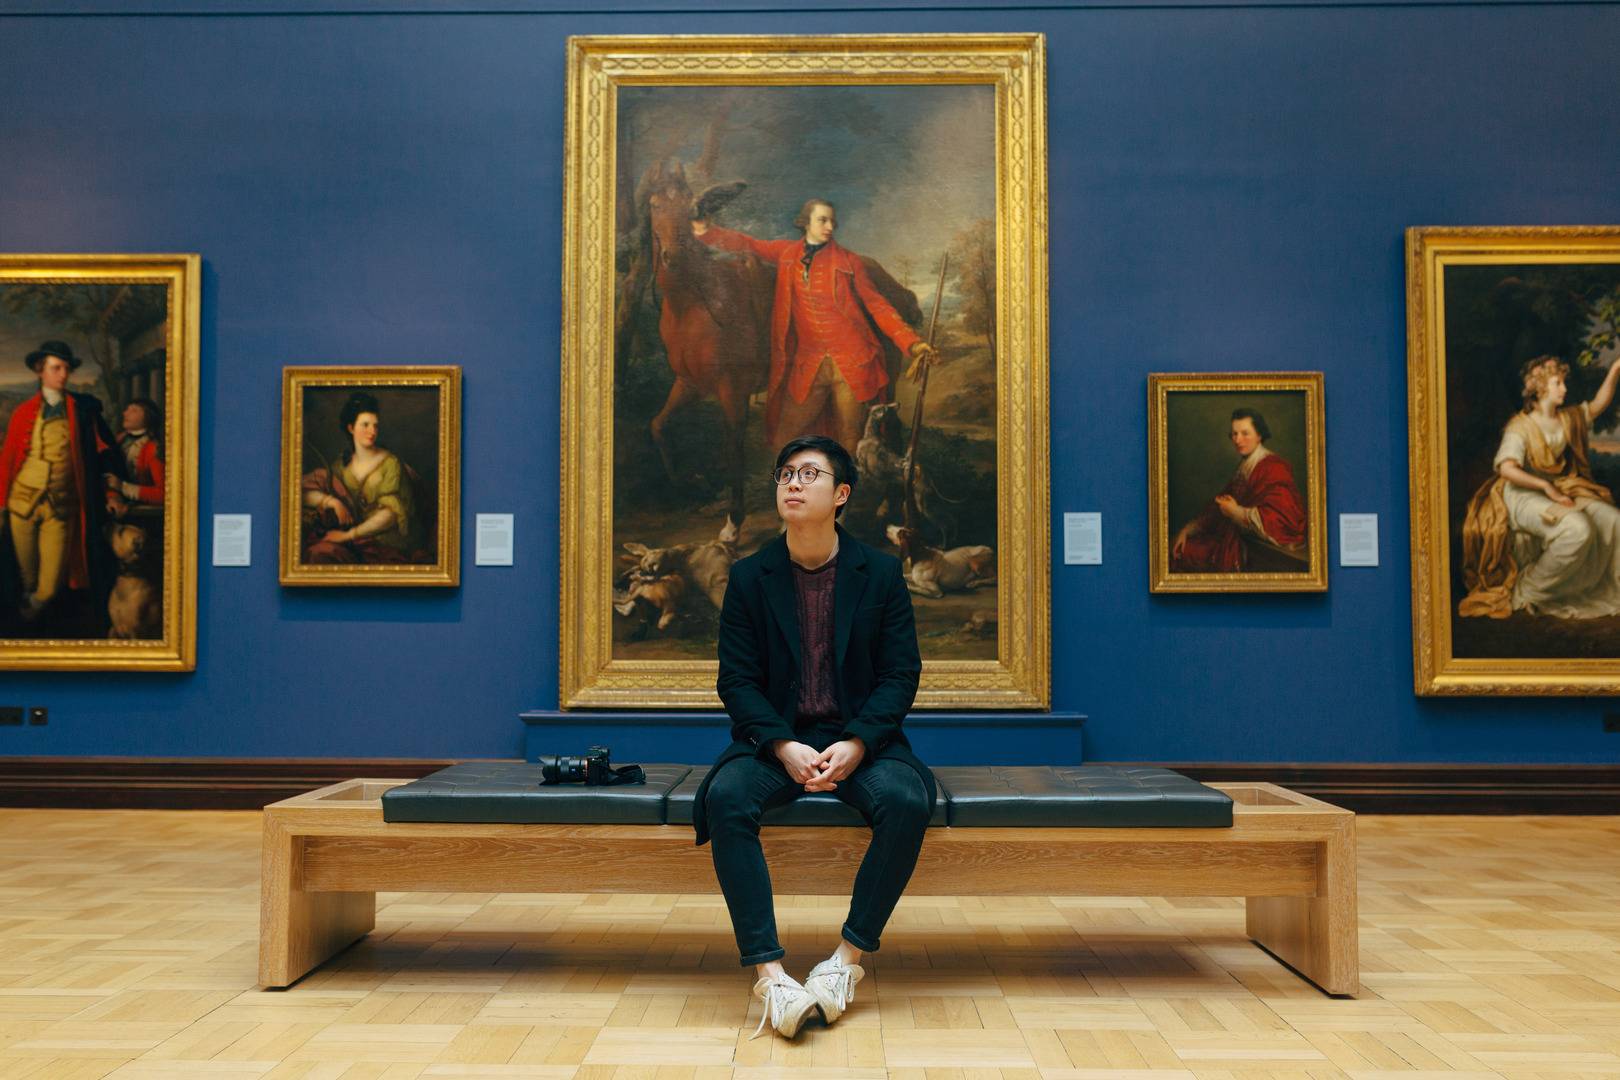 A man sitting in a gallery full of portraits, National Galleries of Scotland